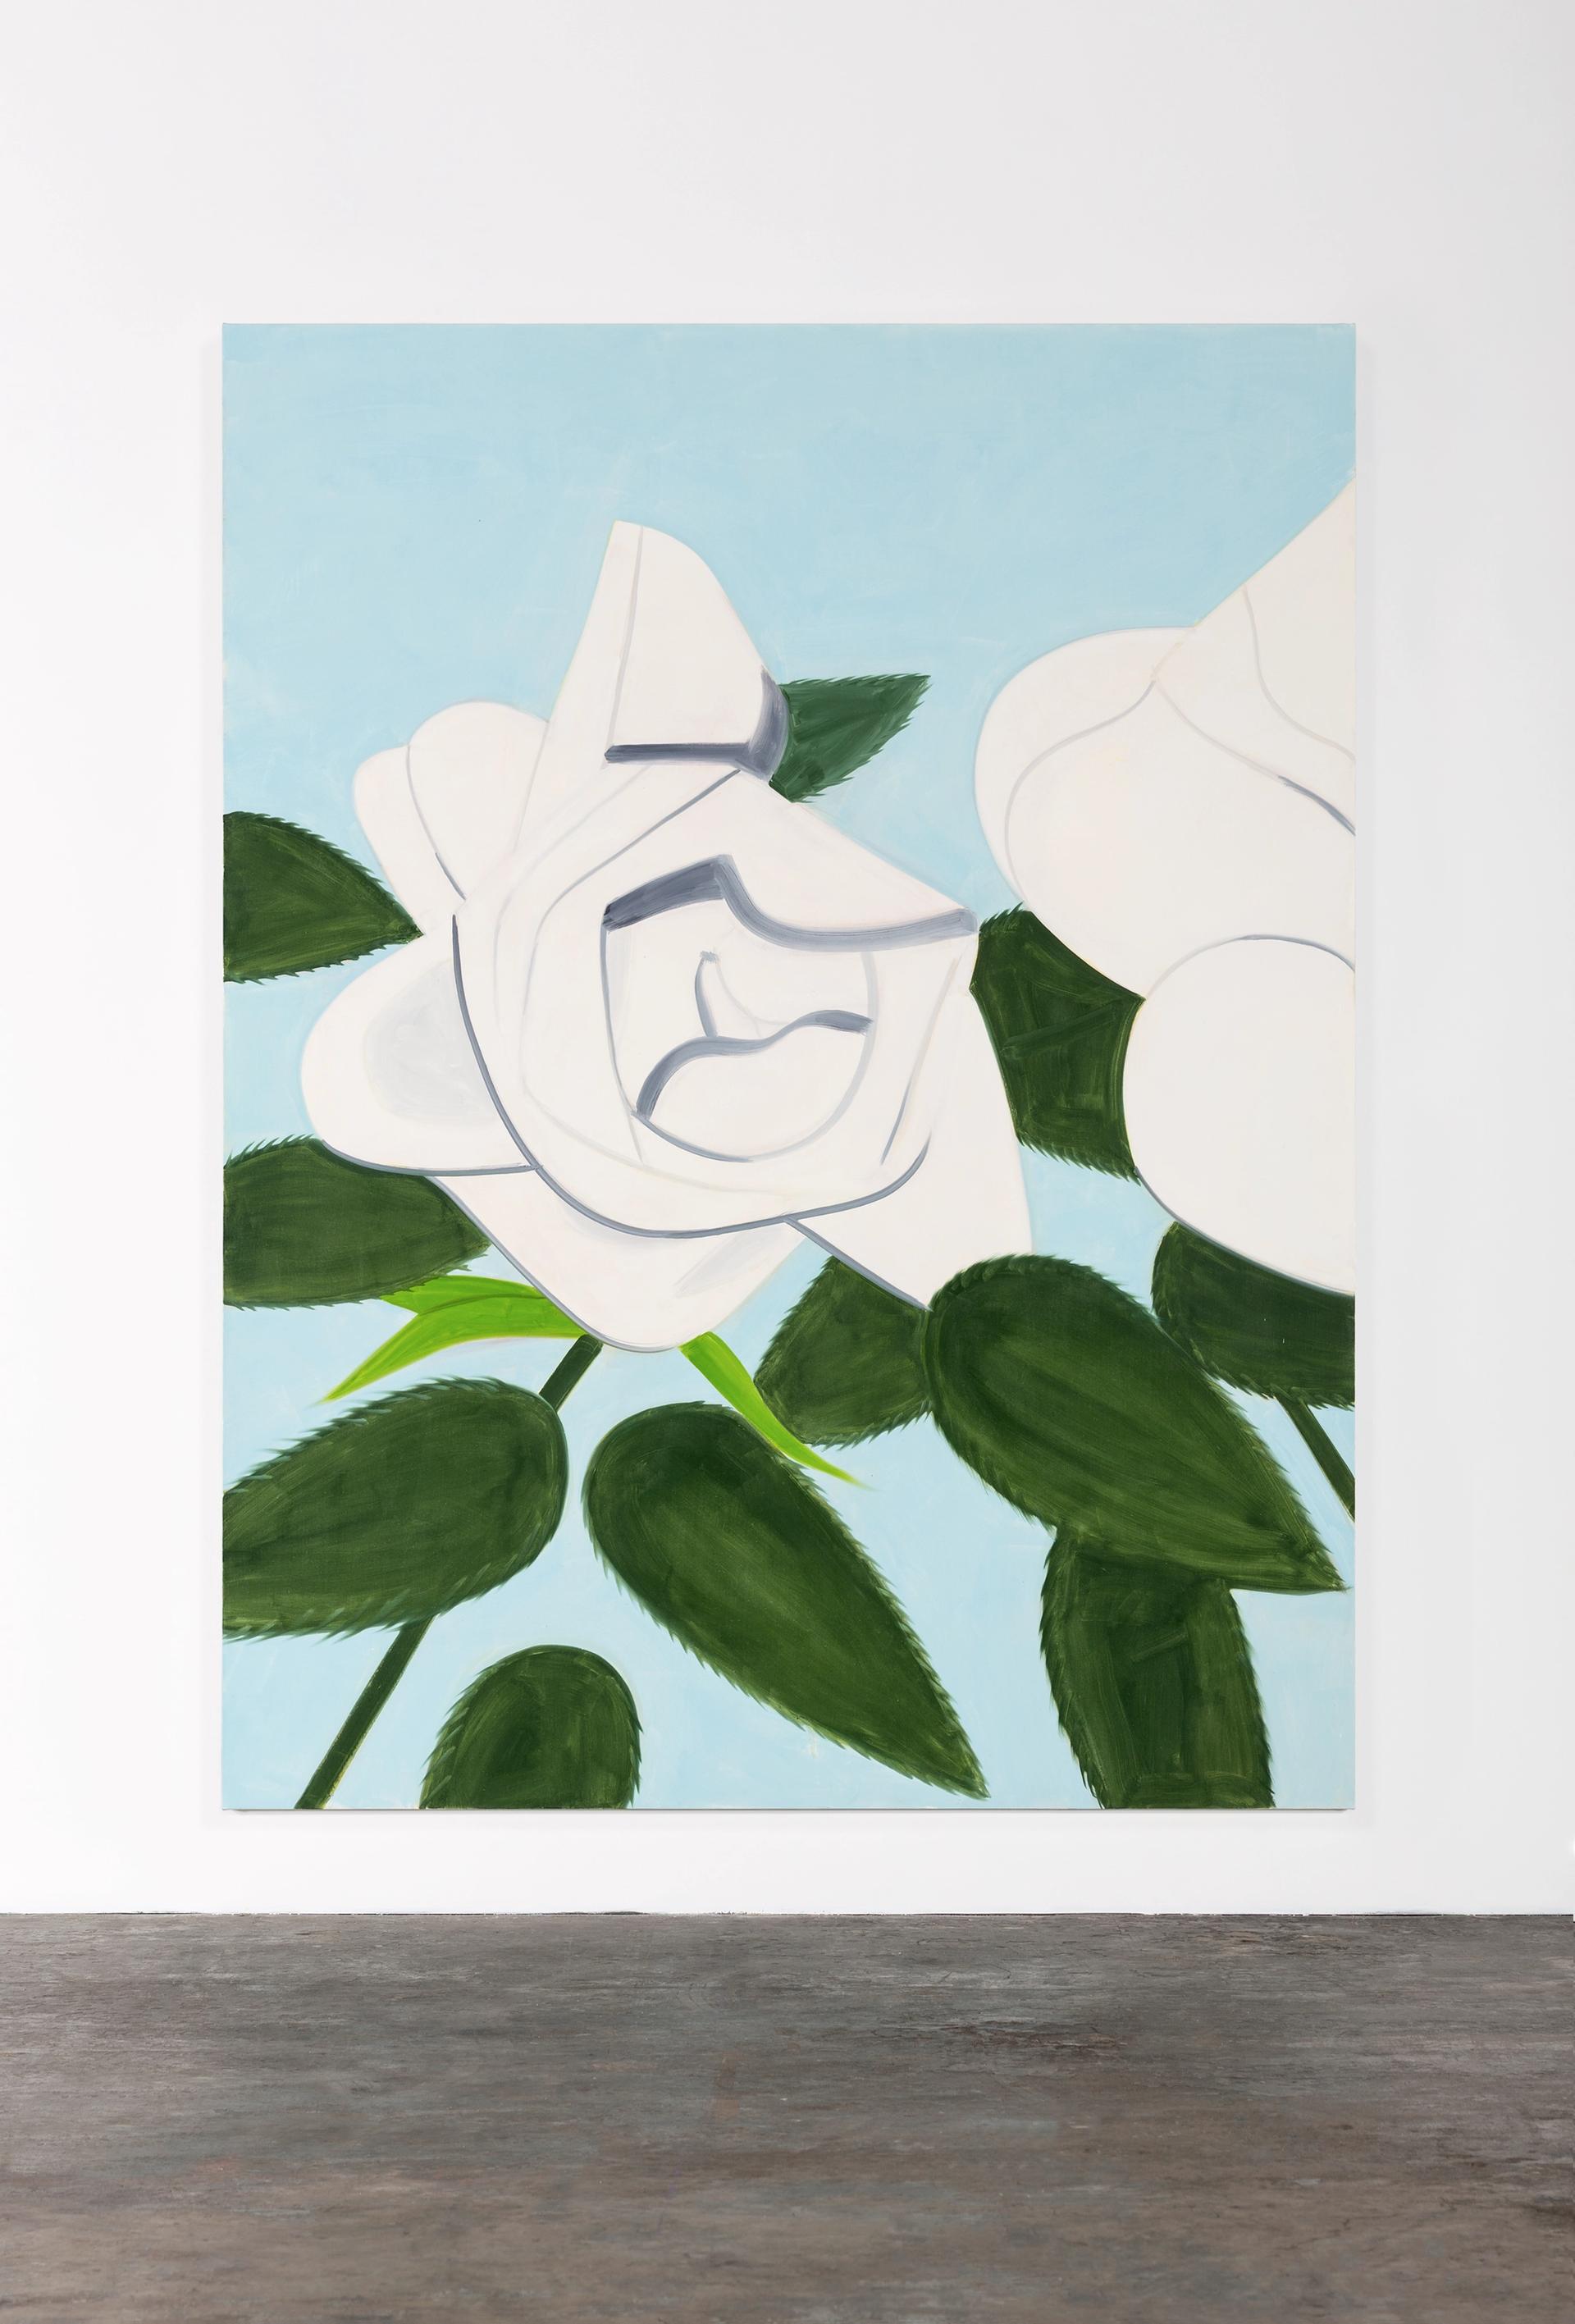 Alex Katz's White Roses 7 (2012) is offered for $900,000 by Gavin Brown's Enterprise. Courtesy of Sotheby's